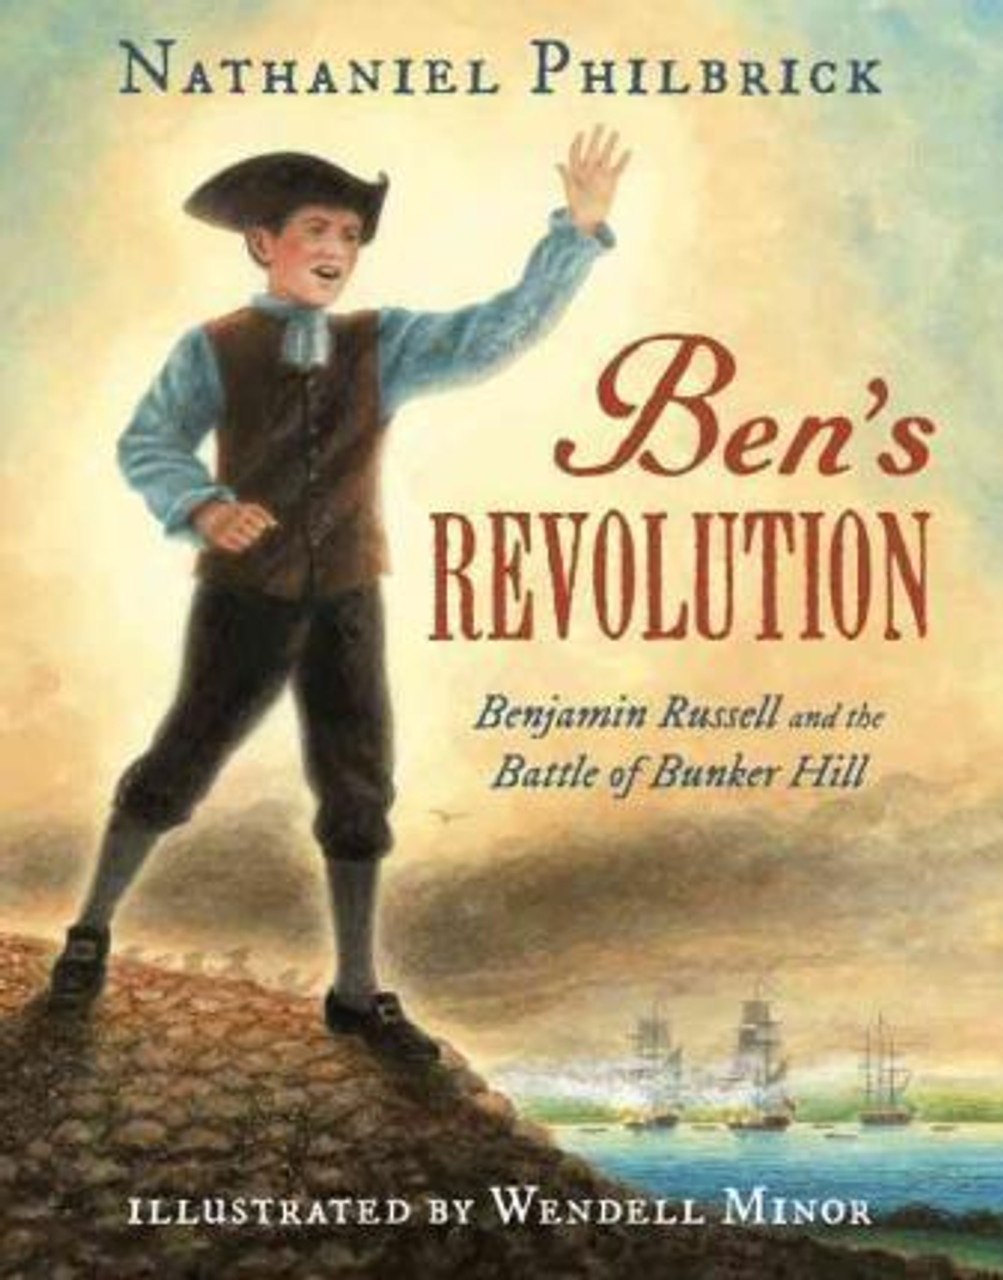 Nathaniel Philbrick / Ben's Revolution : Benjamin Russell and the Battle of Bunker Hill (Children's Coffee Table book)